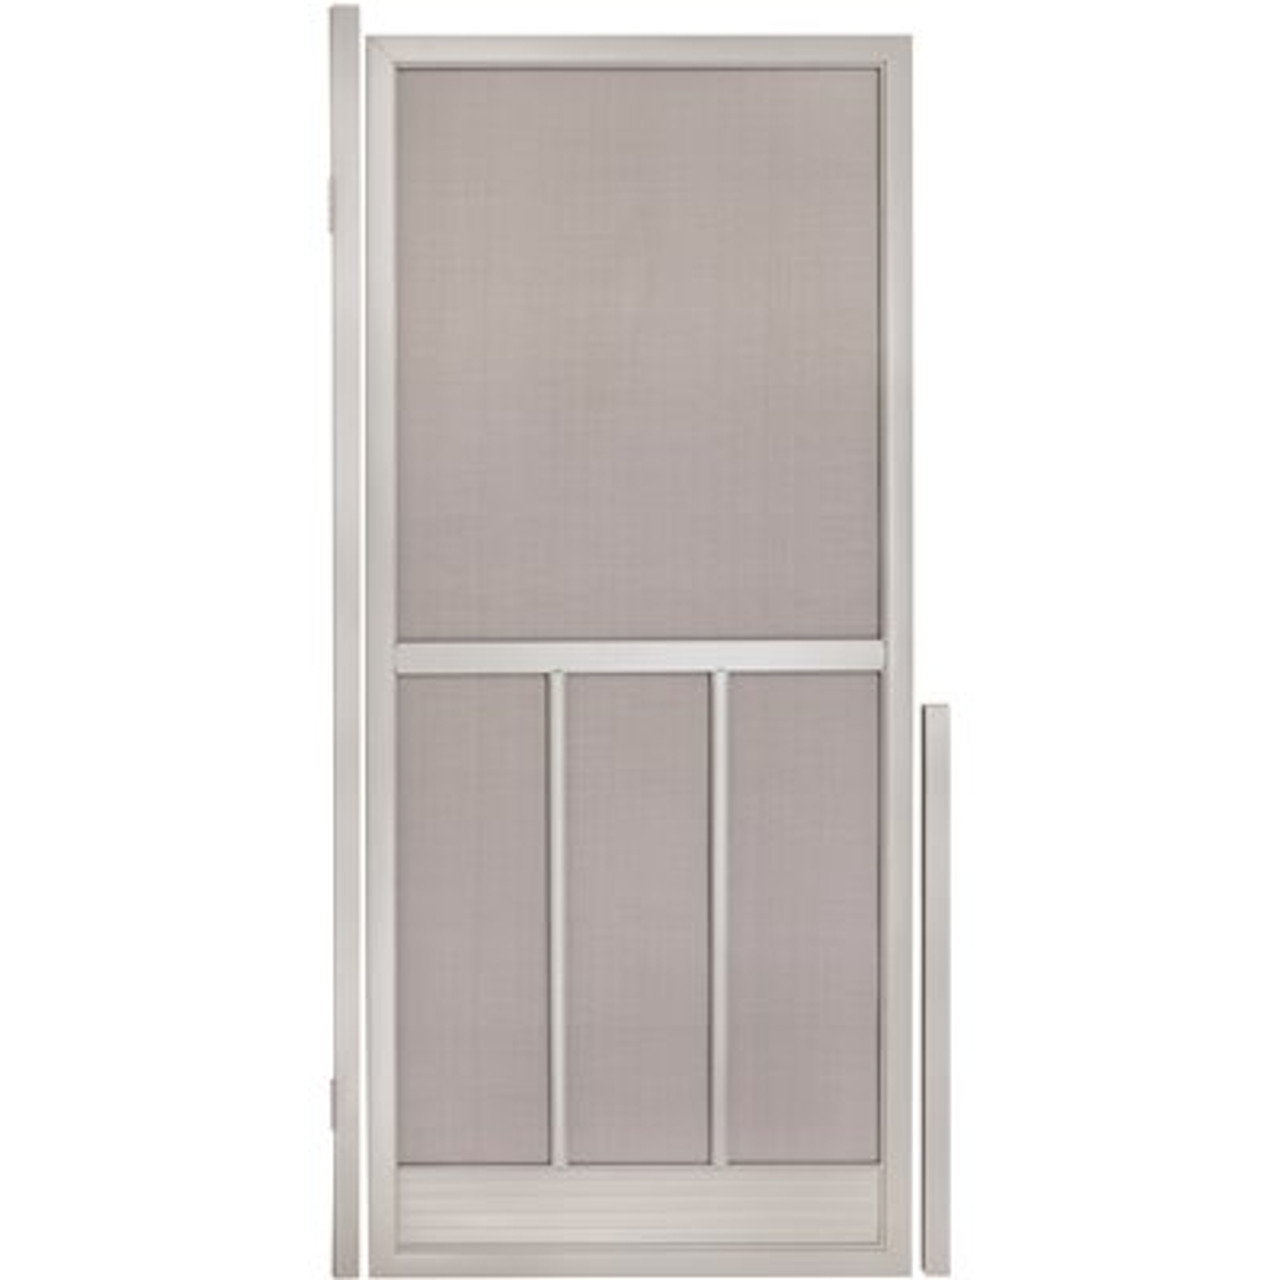 PRIVATE BRAND UNBRANDED 36 Hinged Screen Door Gray